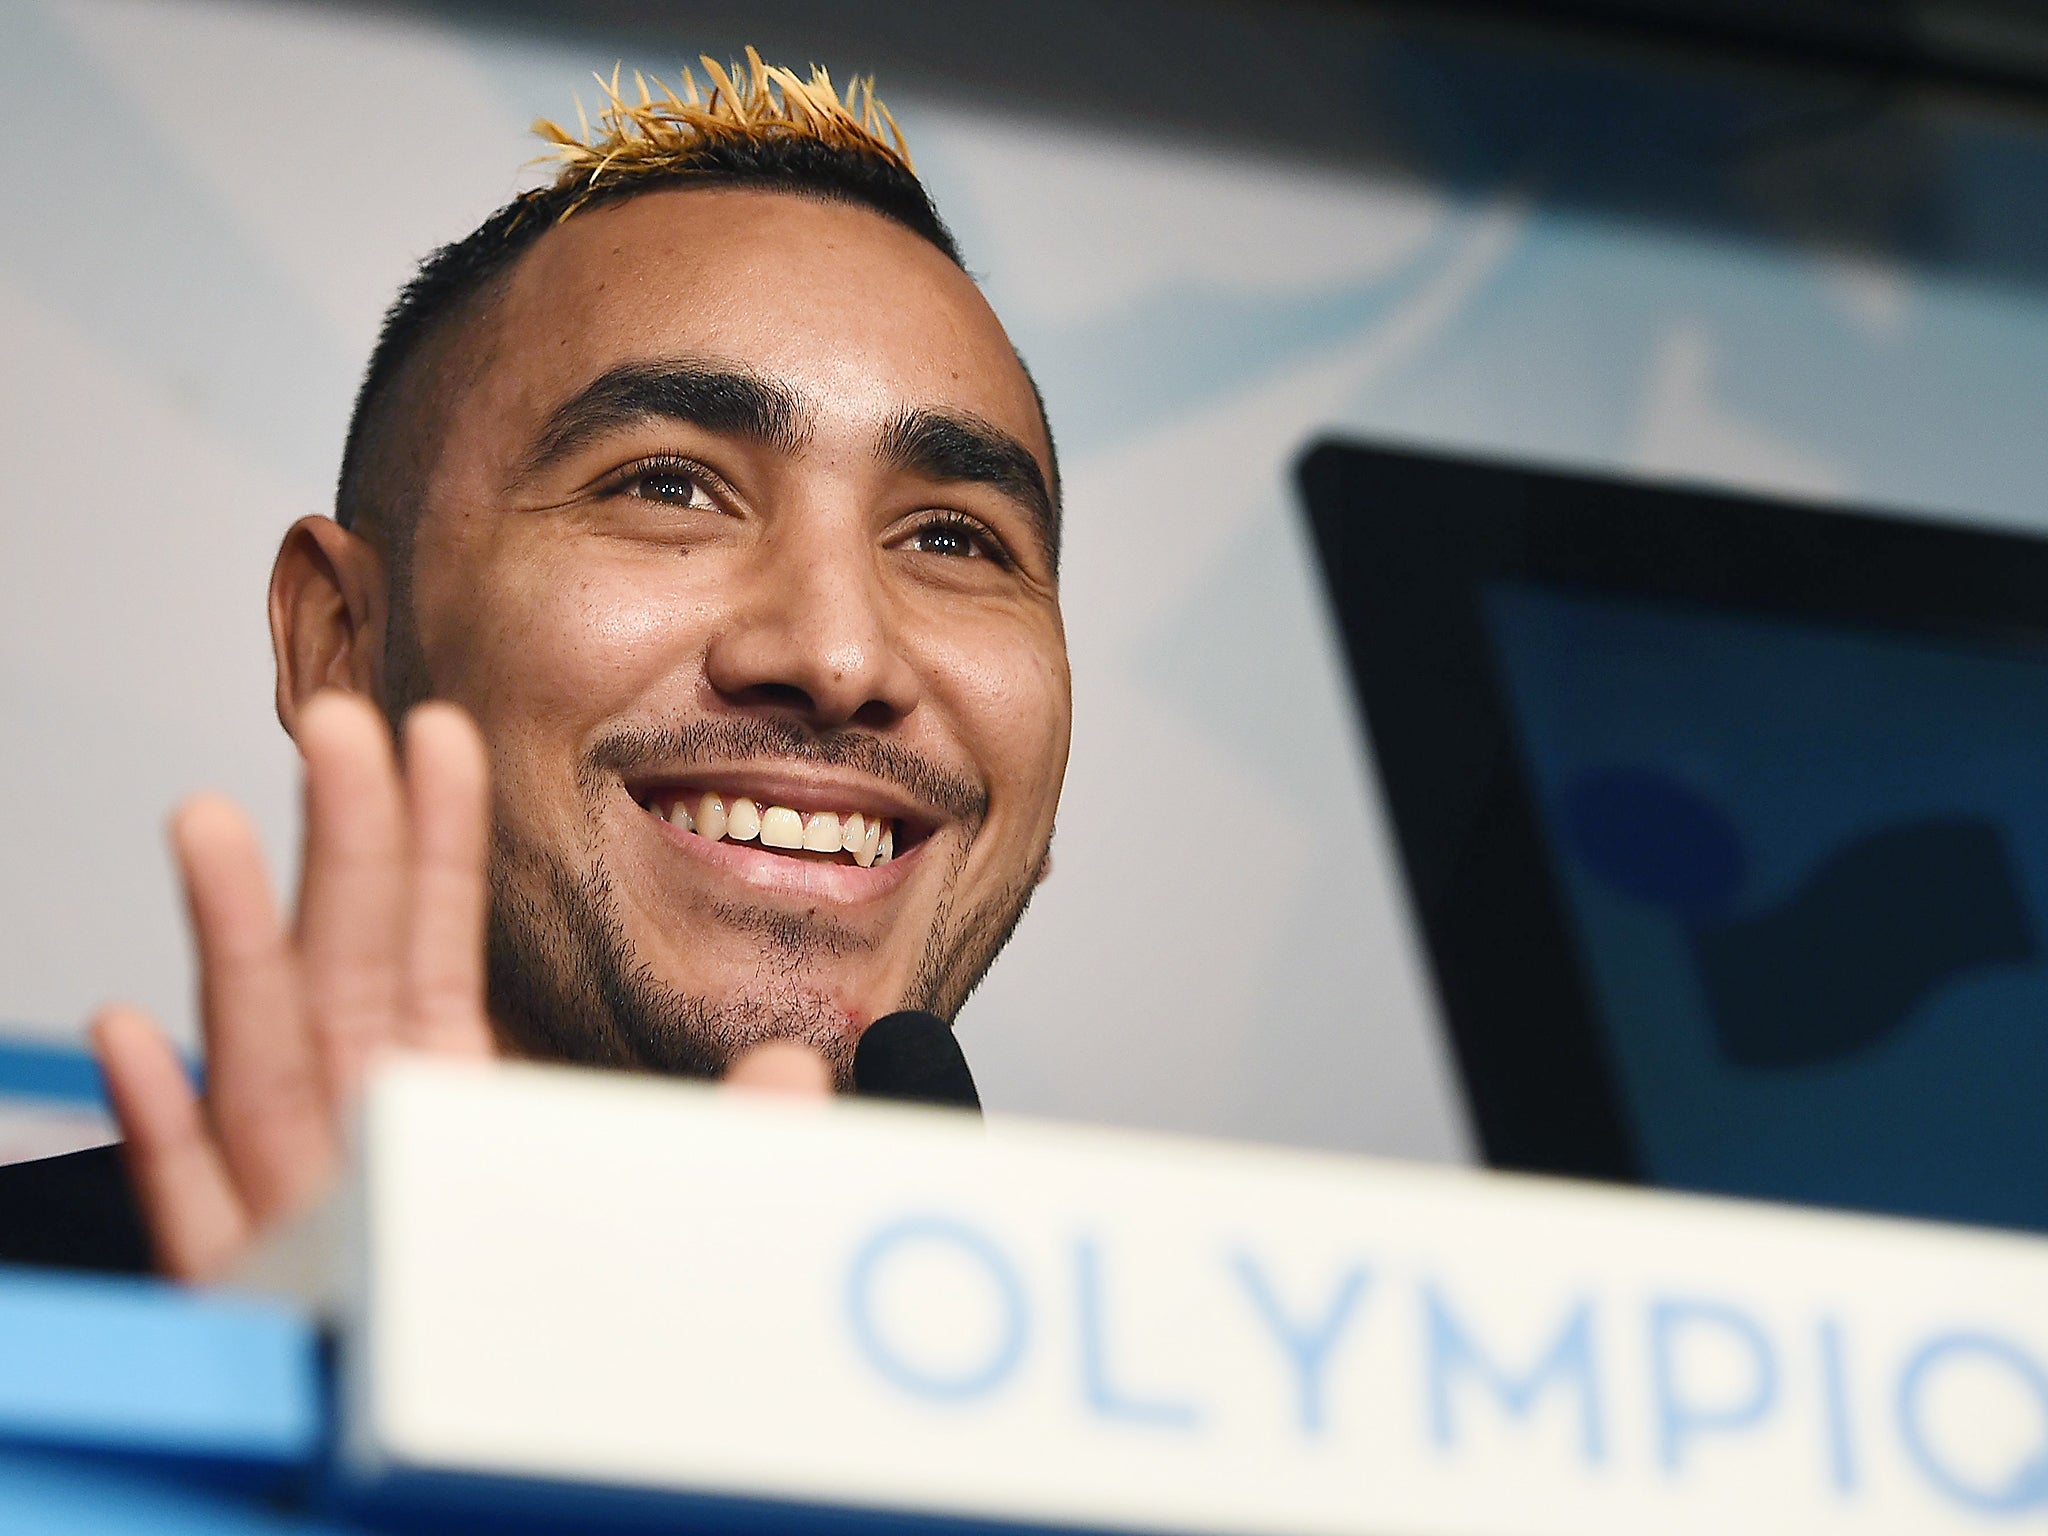 Dimitri Payet has left West Ham to return to Marseille in a £25m deal